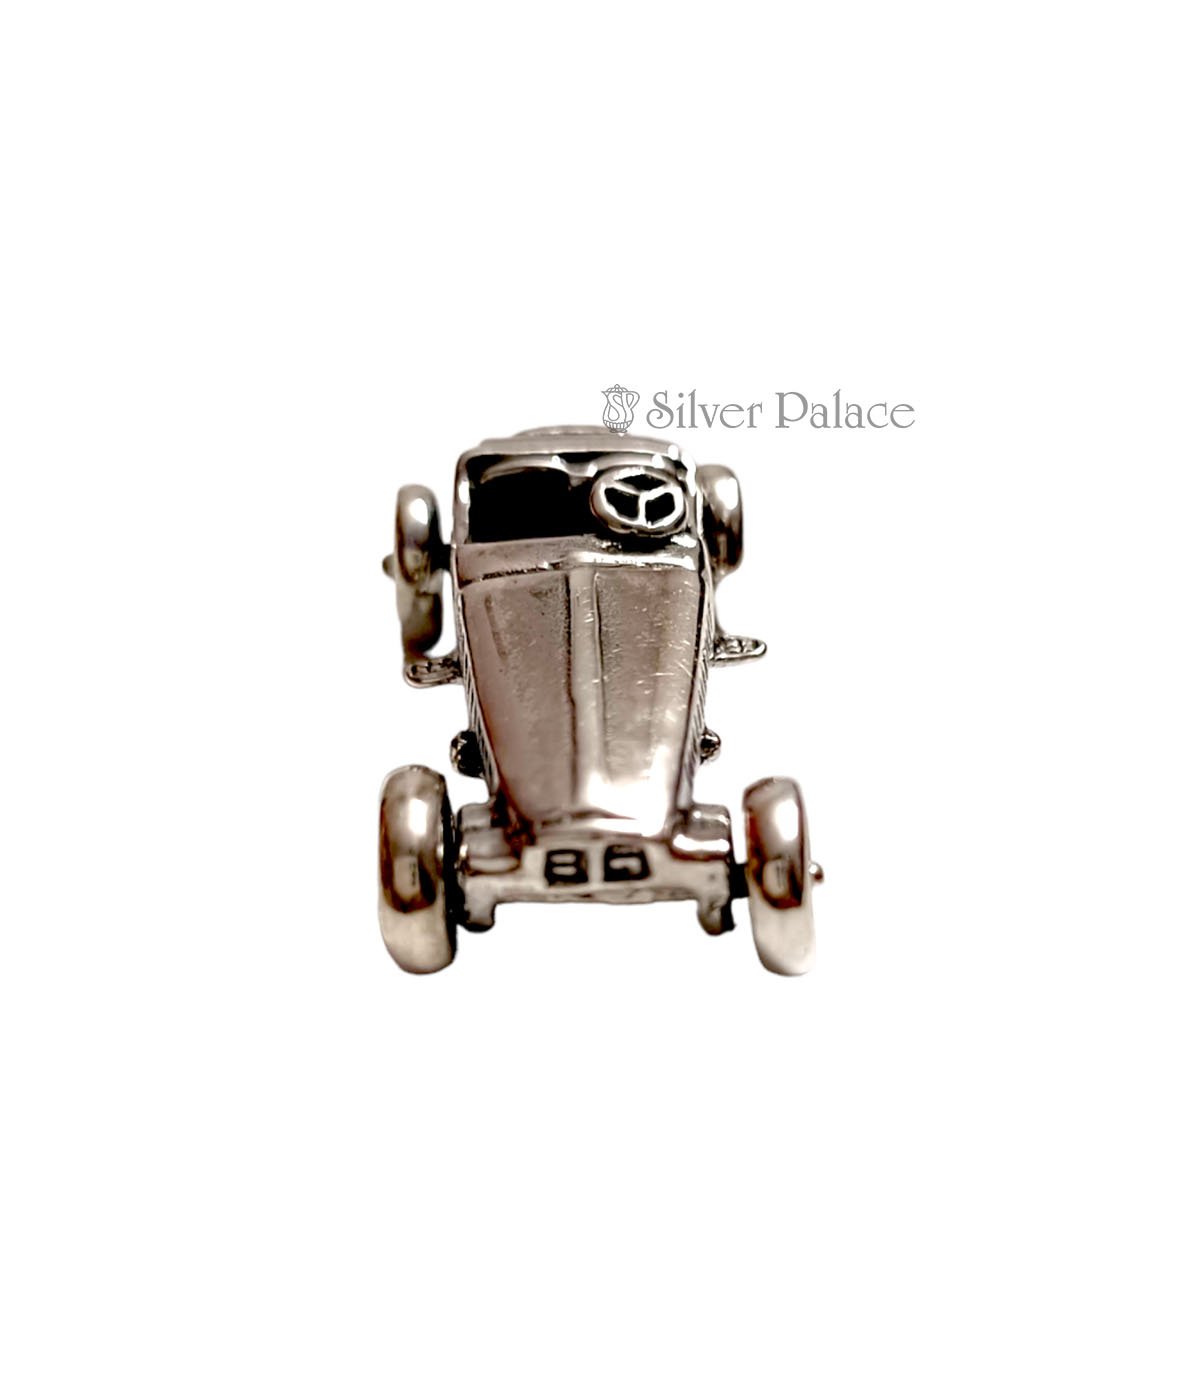 STERLING SILVER MINIATURE CAR GIFT